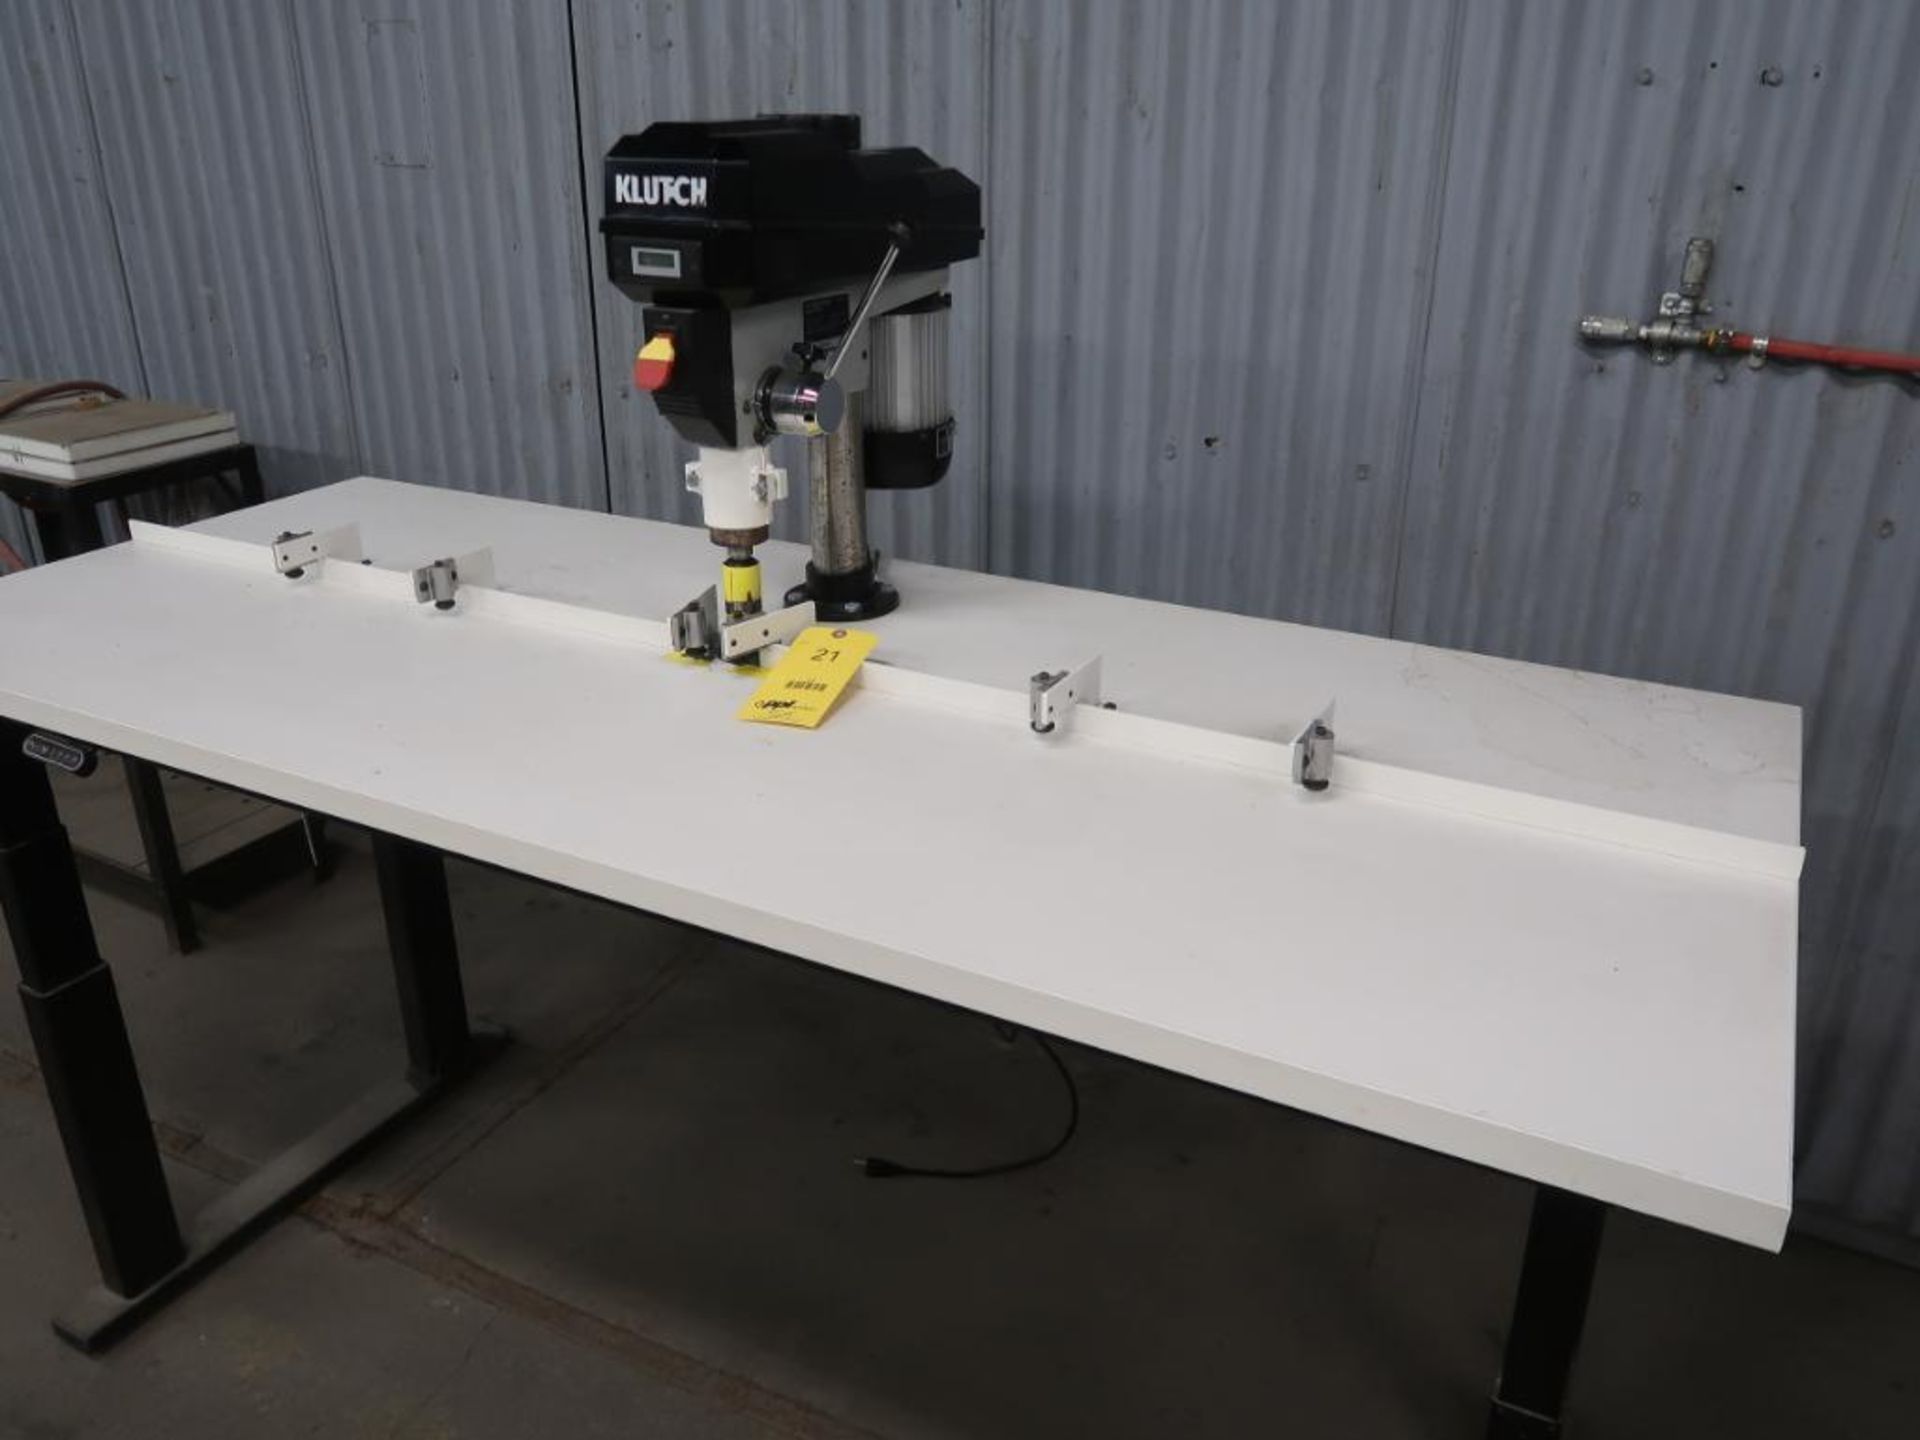 LOT: (2) Klutch 12 in. Bench Mounted Drill Presses Model 49386, with Adjustable Height Tables - Image 4 of 6